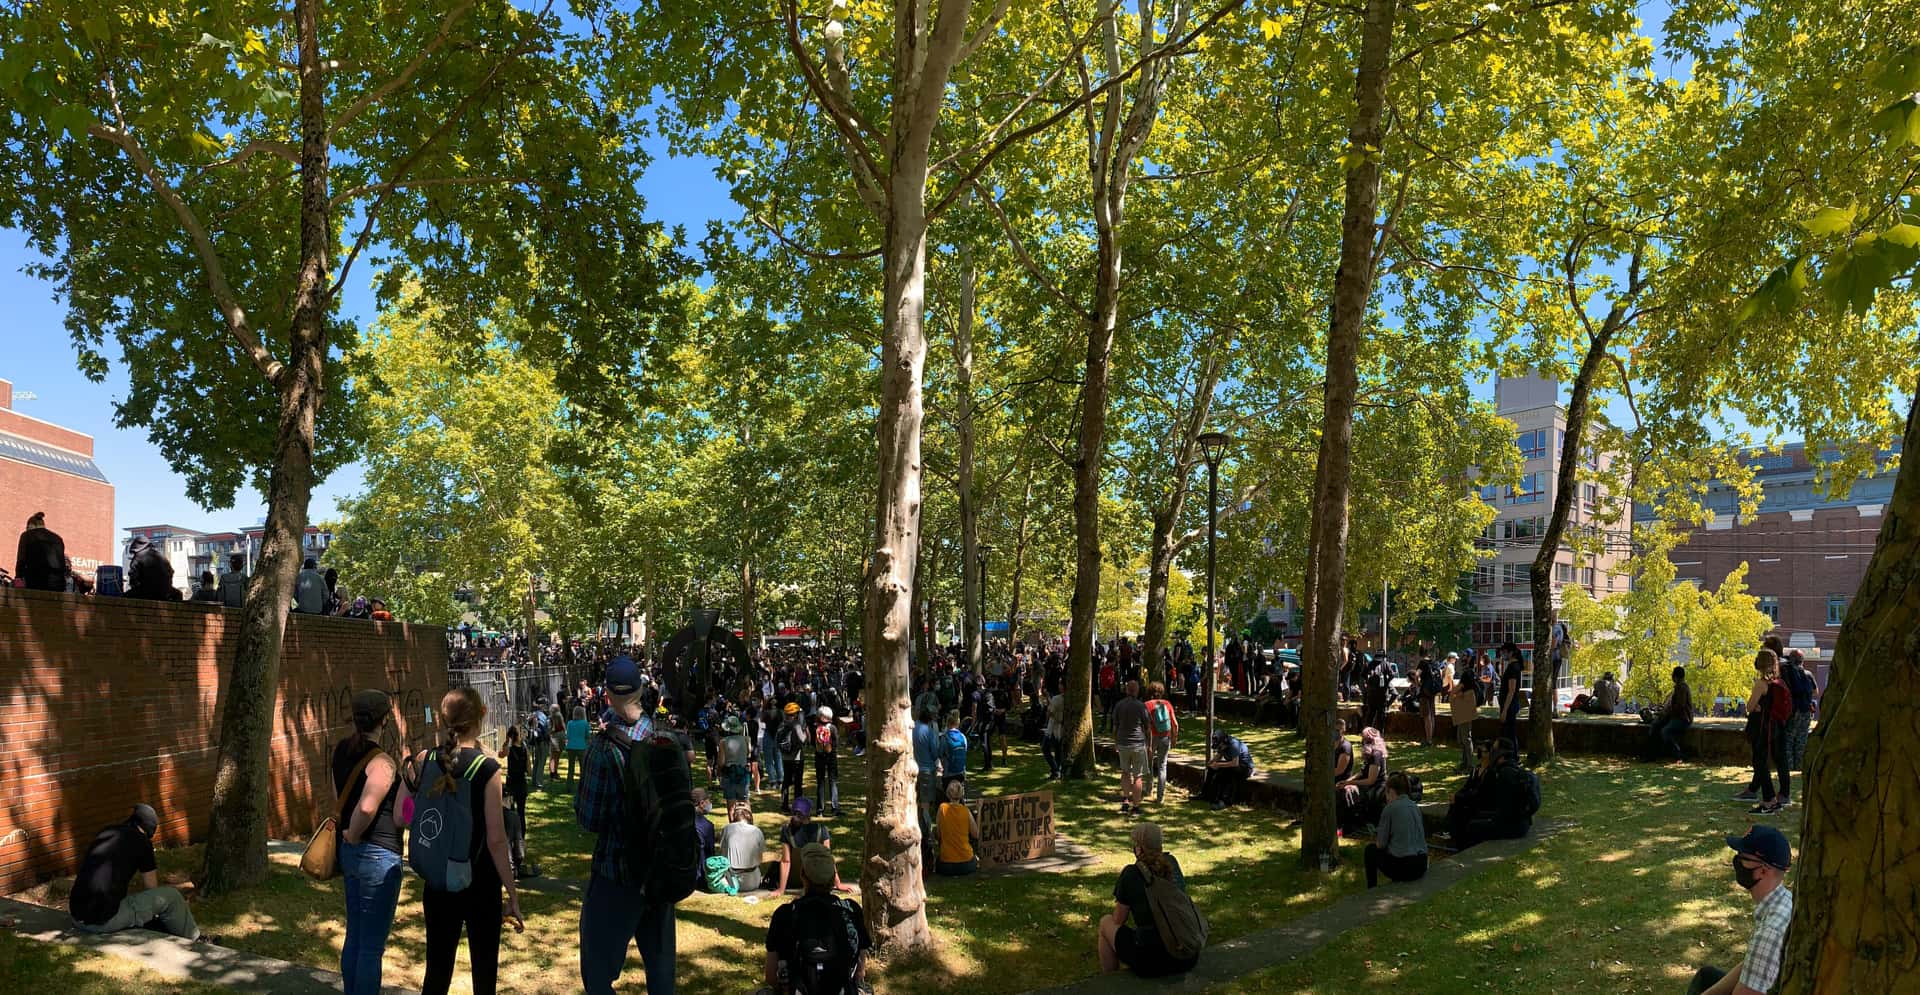 Black Lives Matter protesters await the beginning of a march under the shade of trees on the Seattle Central College campus